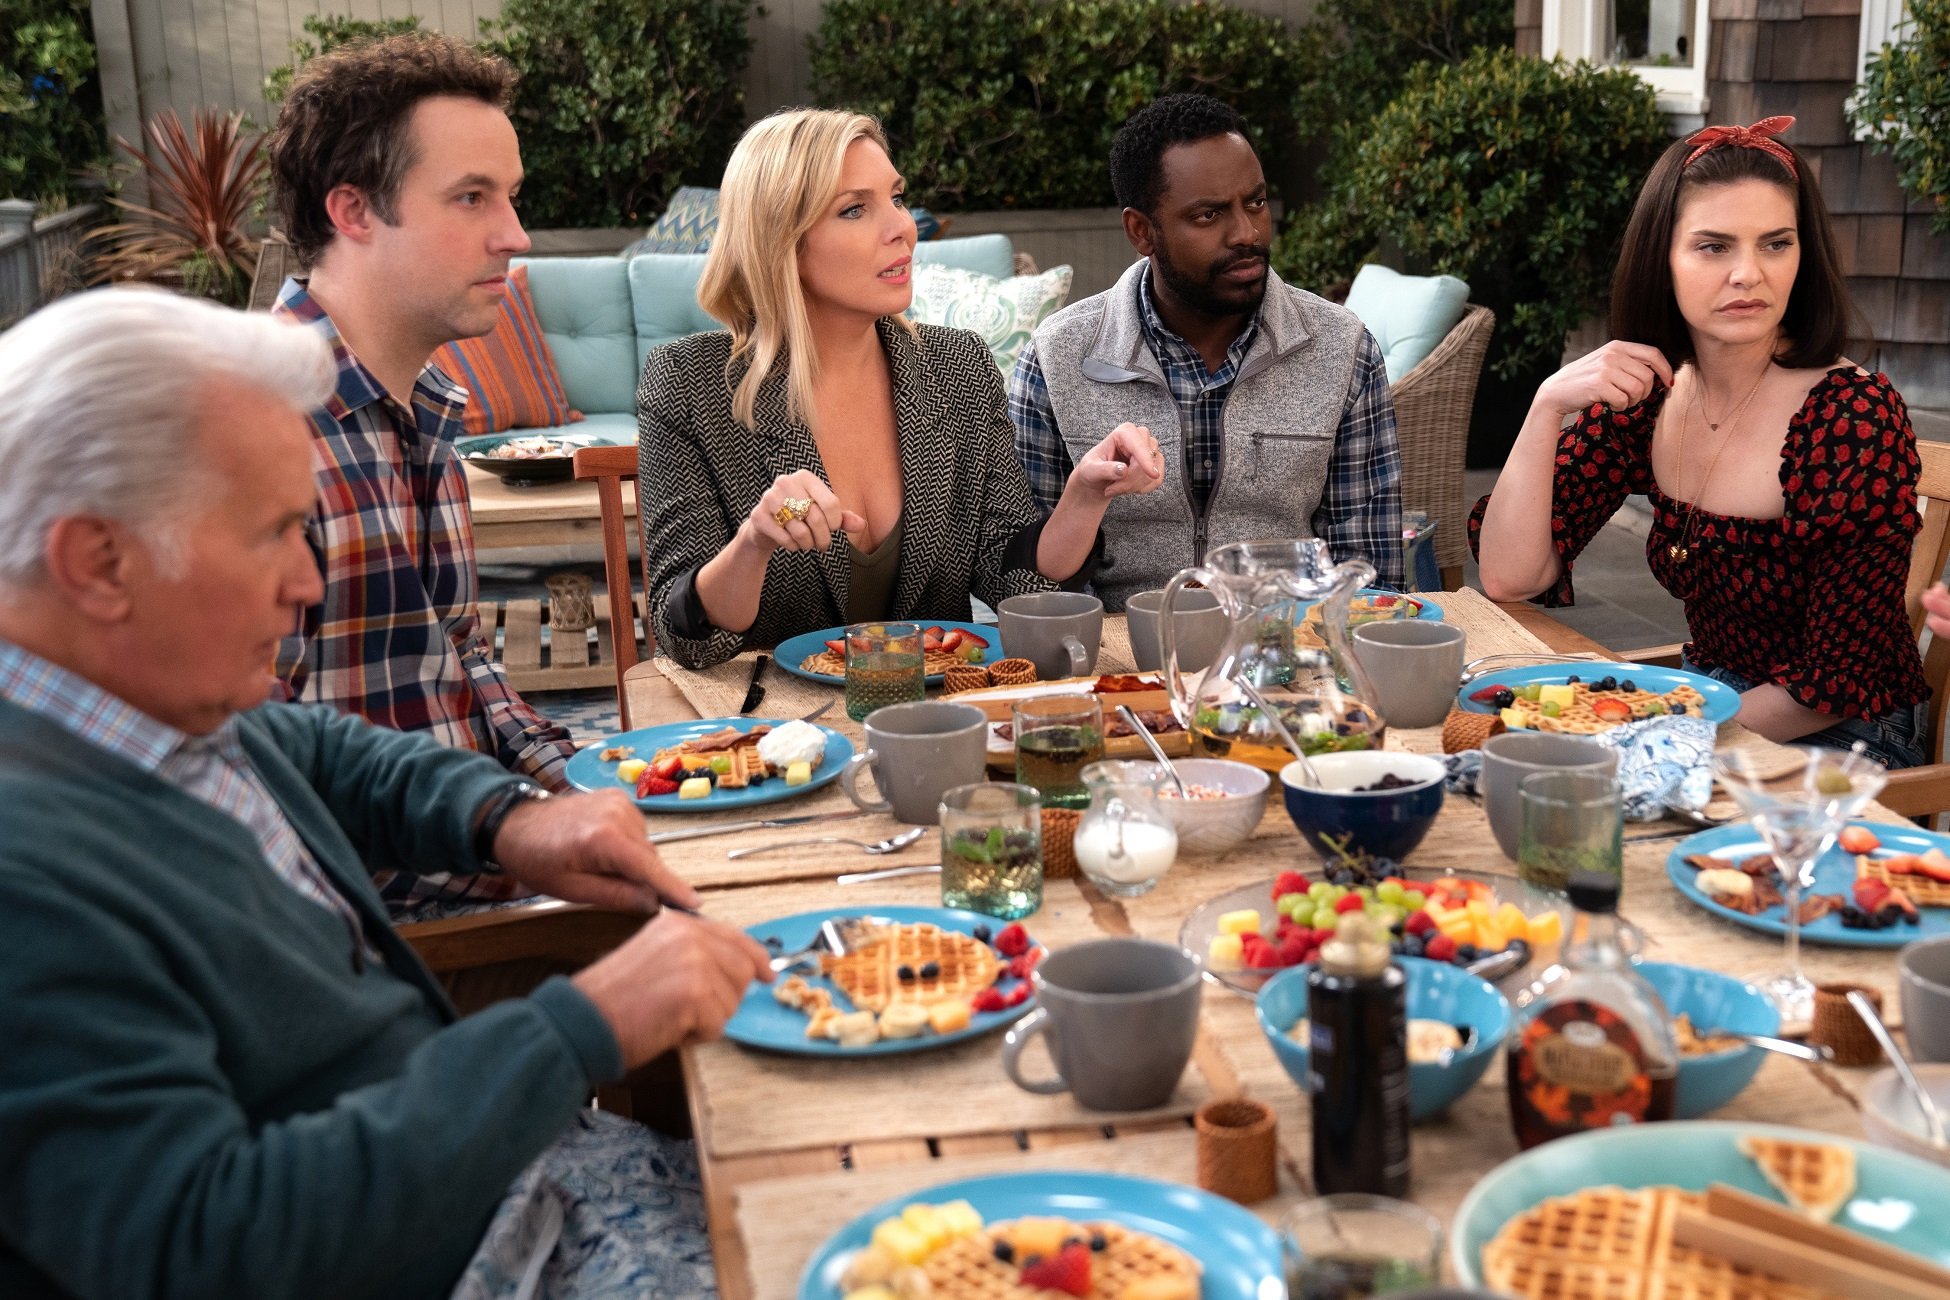 Martin Sheen as Robert, Peter Cambor as Barry, June Raphael as Brianna, Baron Vaughn as Bud and Lindsay Kraft as Allison sit around a table during season 7 of 'Grace and Frankie'